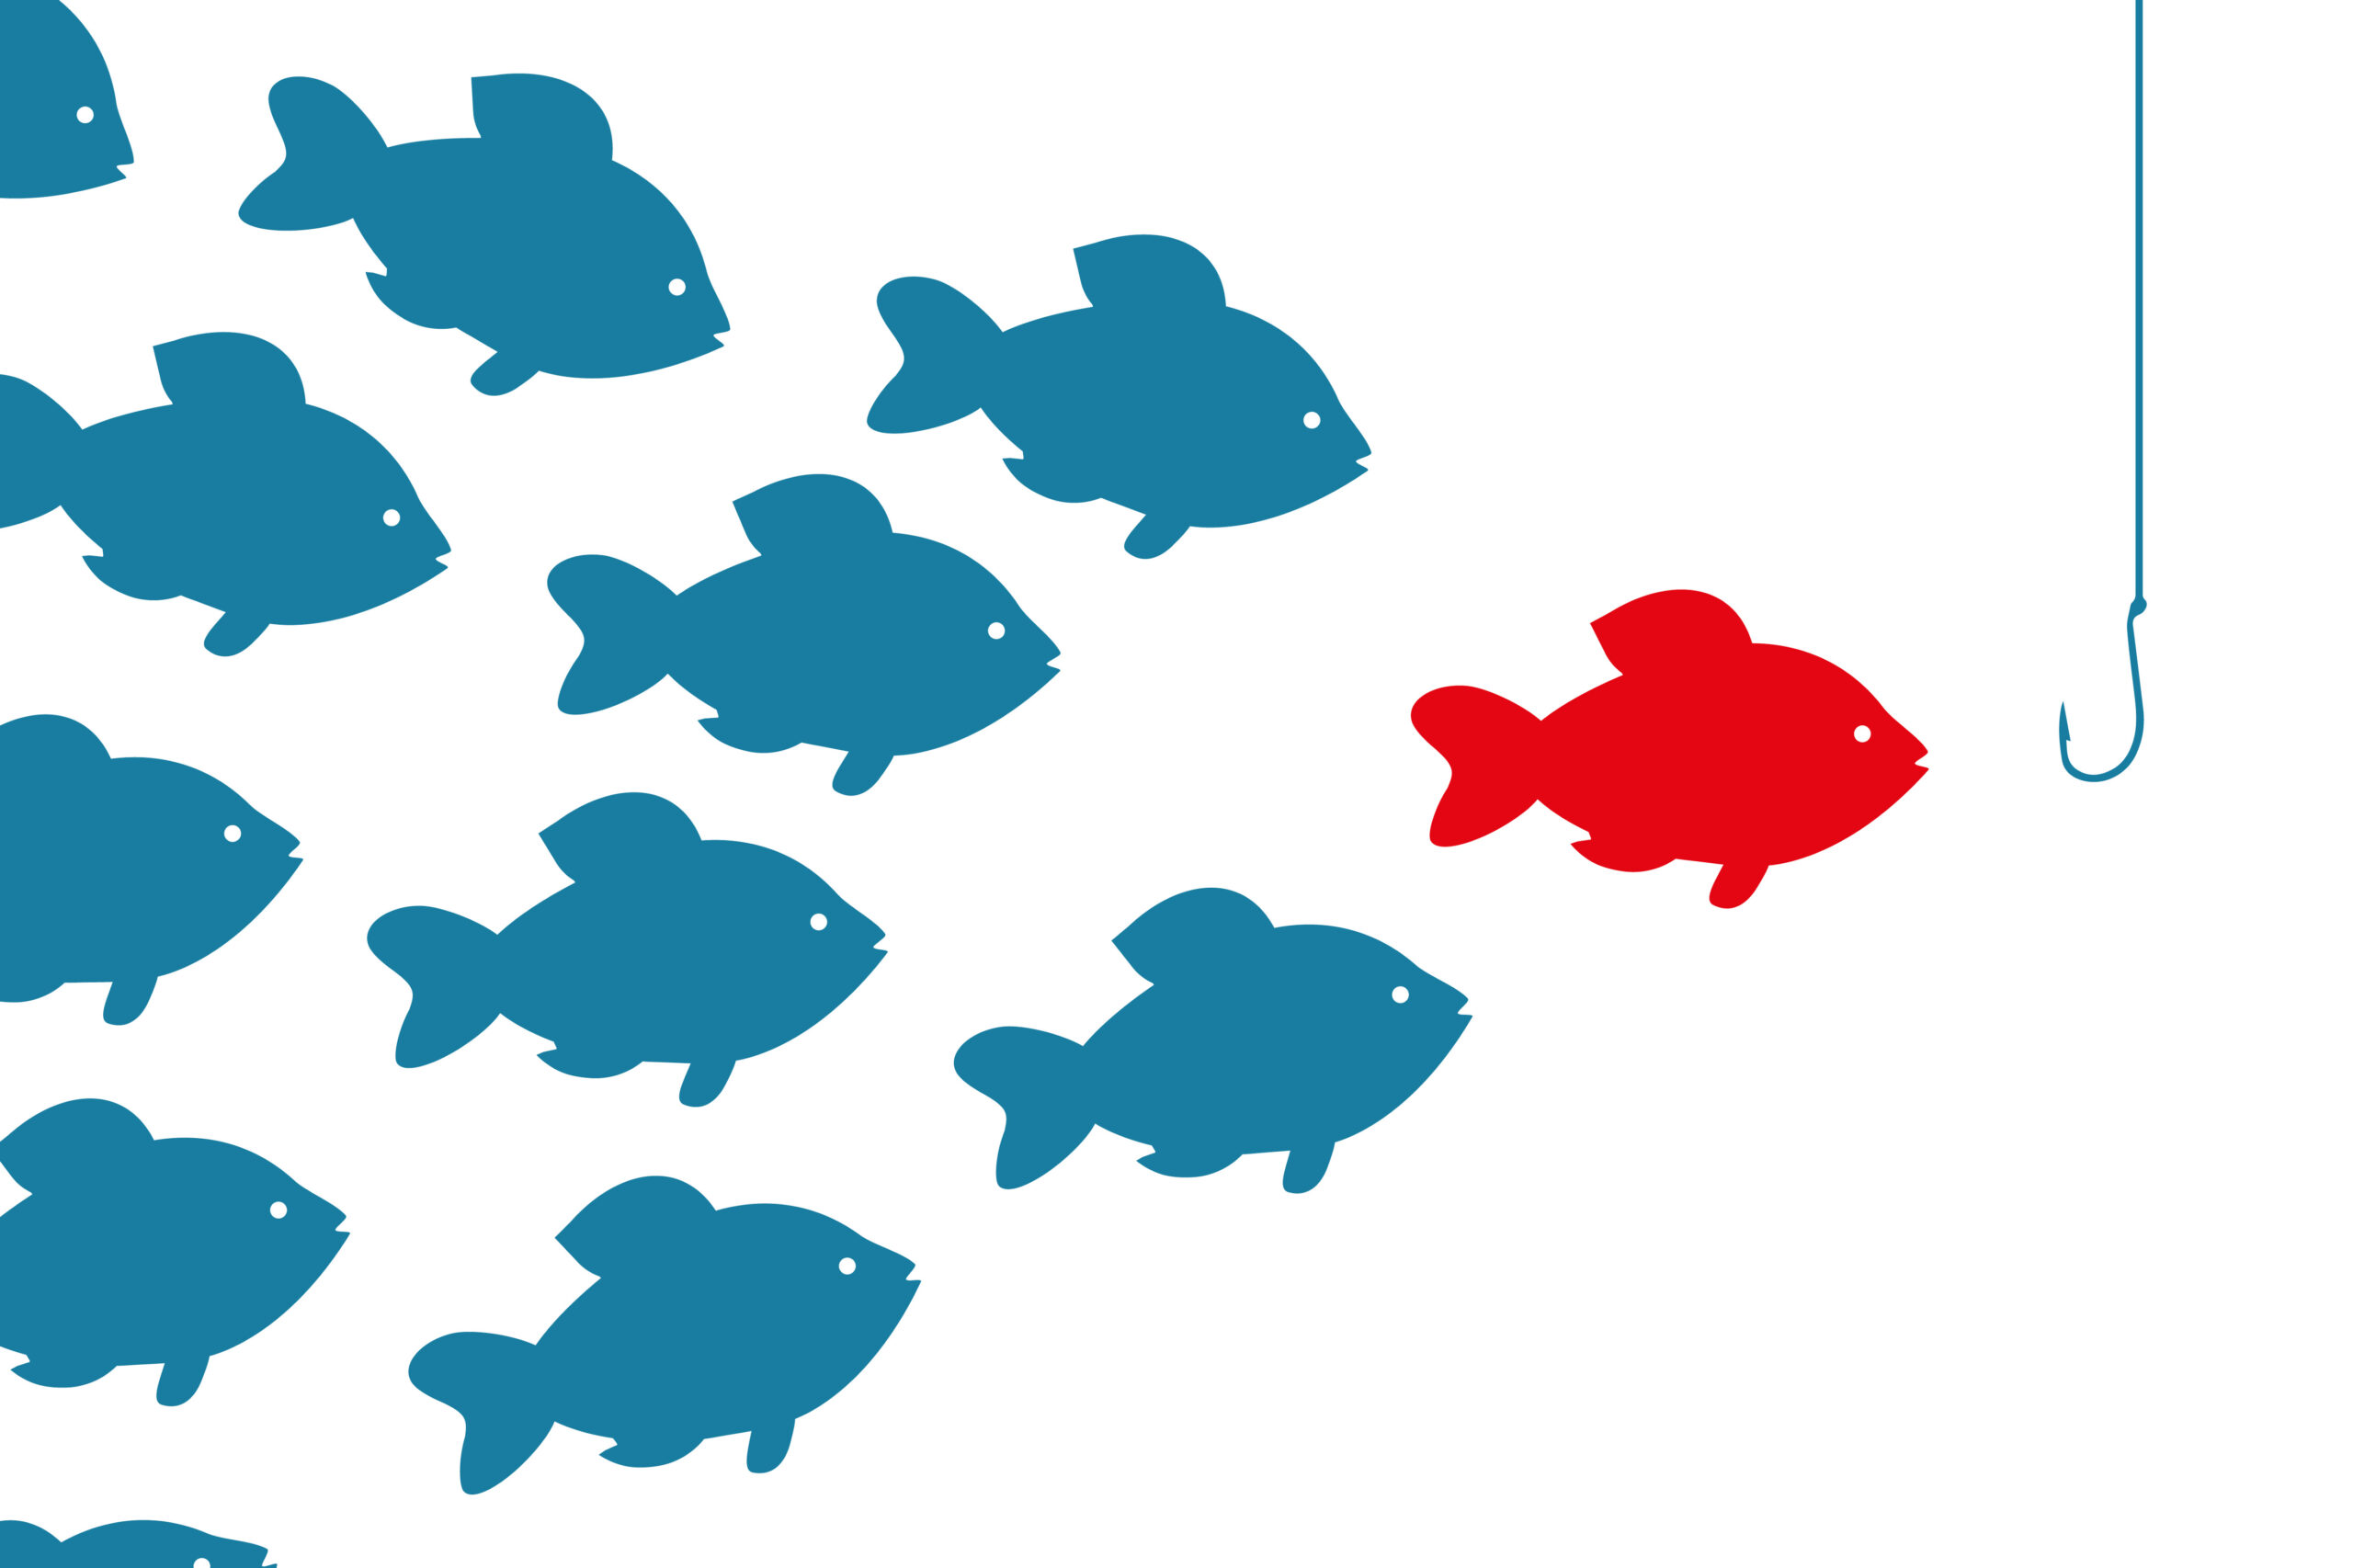 One red fish leading many blue fish. The Fish Stinks From the Head: Warning Signs of an Untrustworthy Non-Profit (Part 2 of 4)